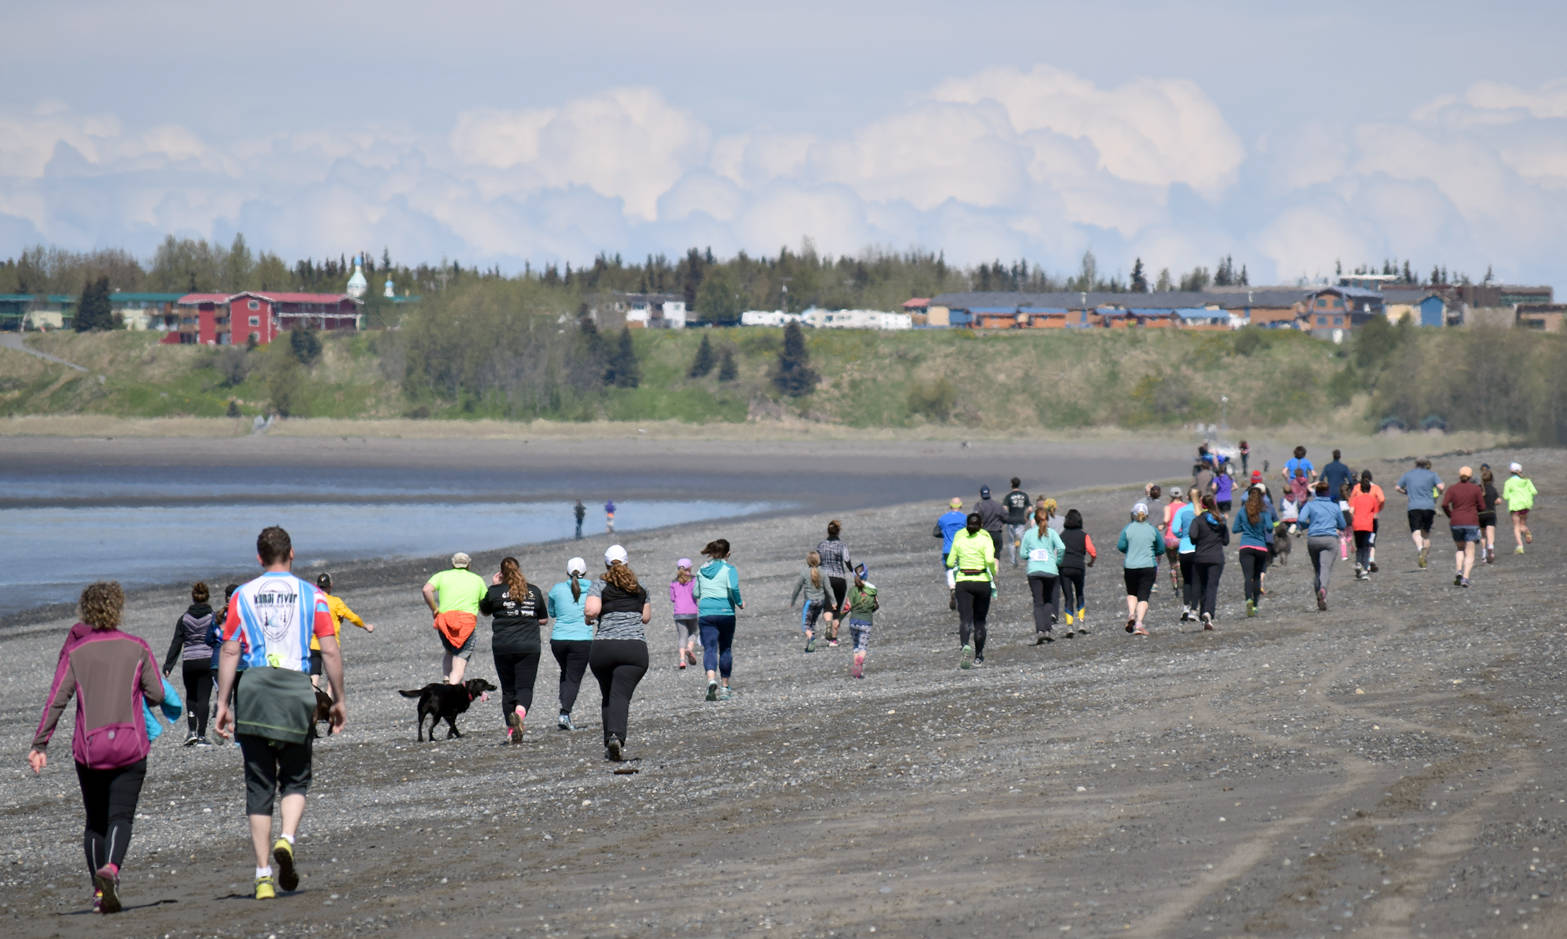 Runners and walkers take to the south Kenai beach for the three-mile event at the Mouth to Mouth Wild Run and Ride on Monday, May 29, 2017. (Photo by Jeff Helminiak/Peninsula Clarion)